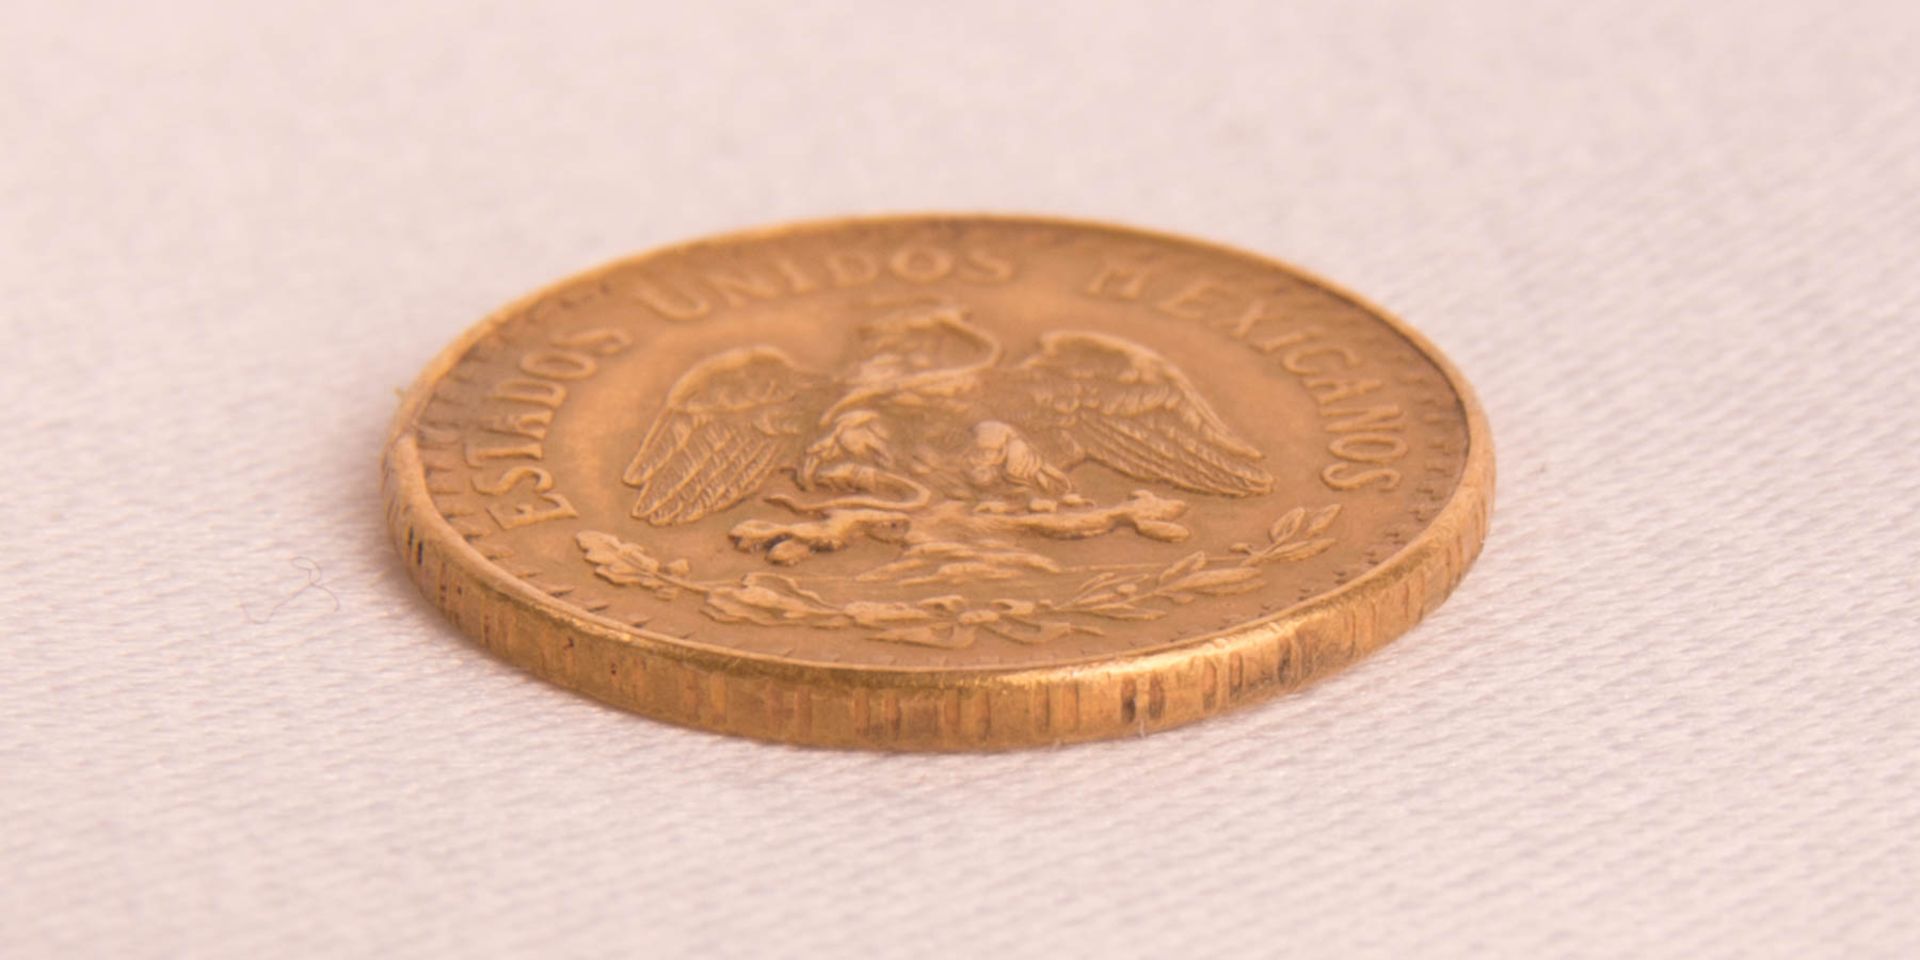 Gold coin 1 Pesos, 1945 M. - Image 3 of 3